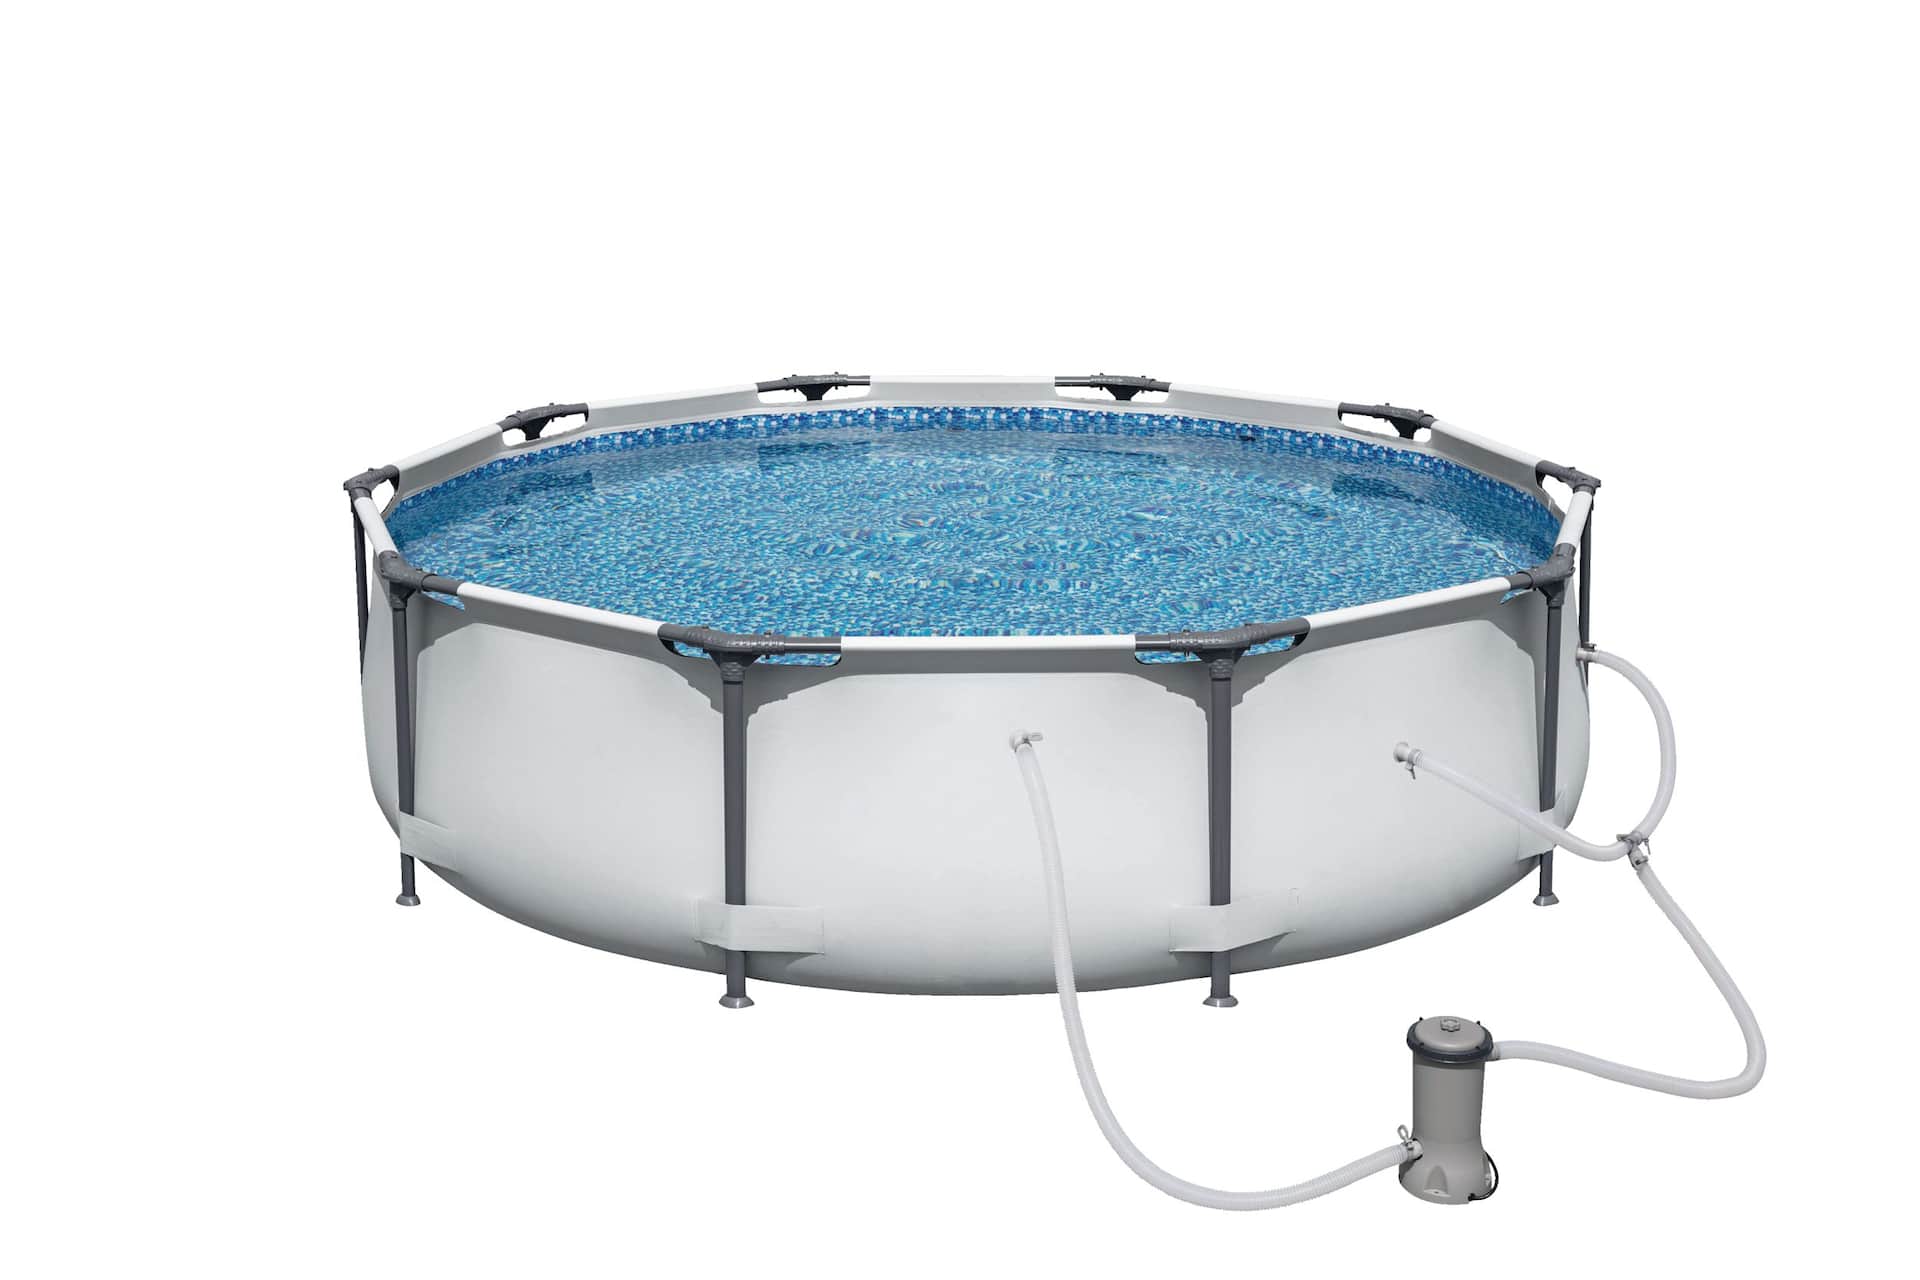 Hydro-force™ Pro Max Round Steel Frame Swimming Pool, 10-ft x 30